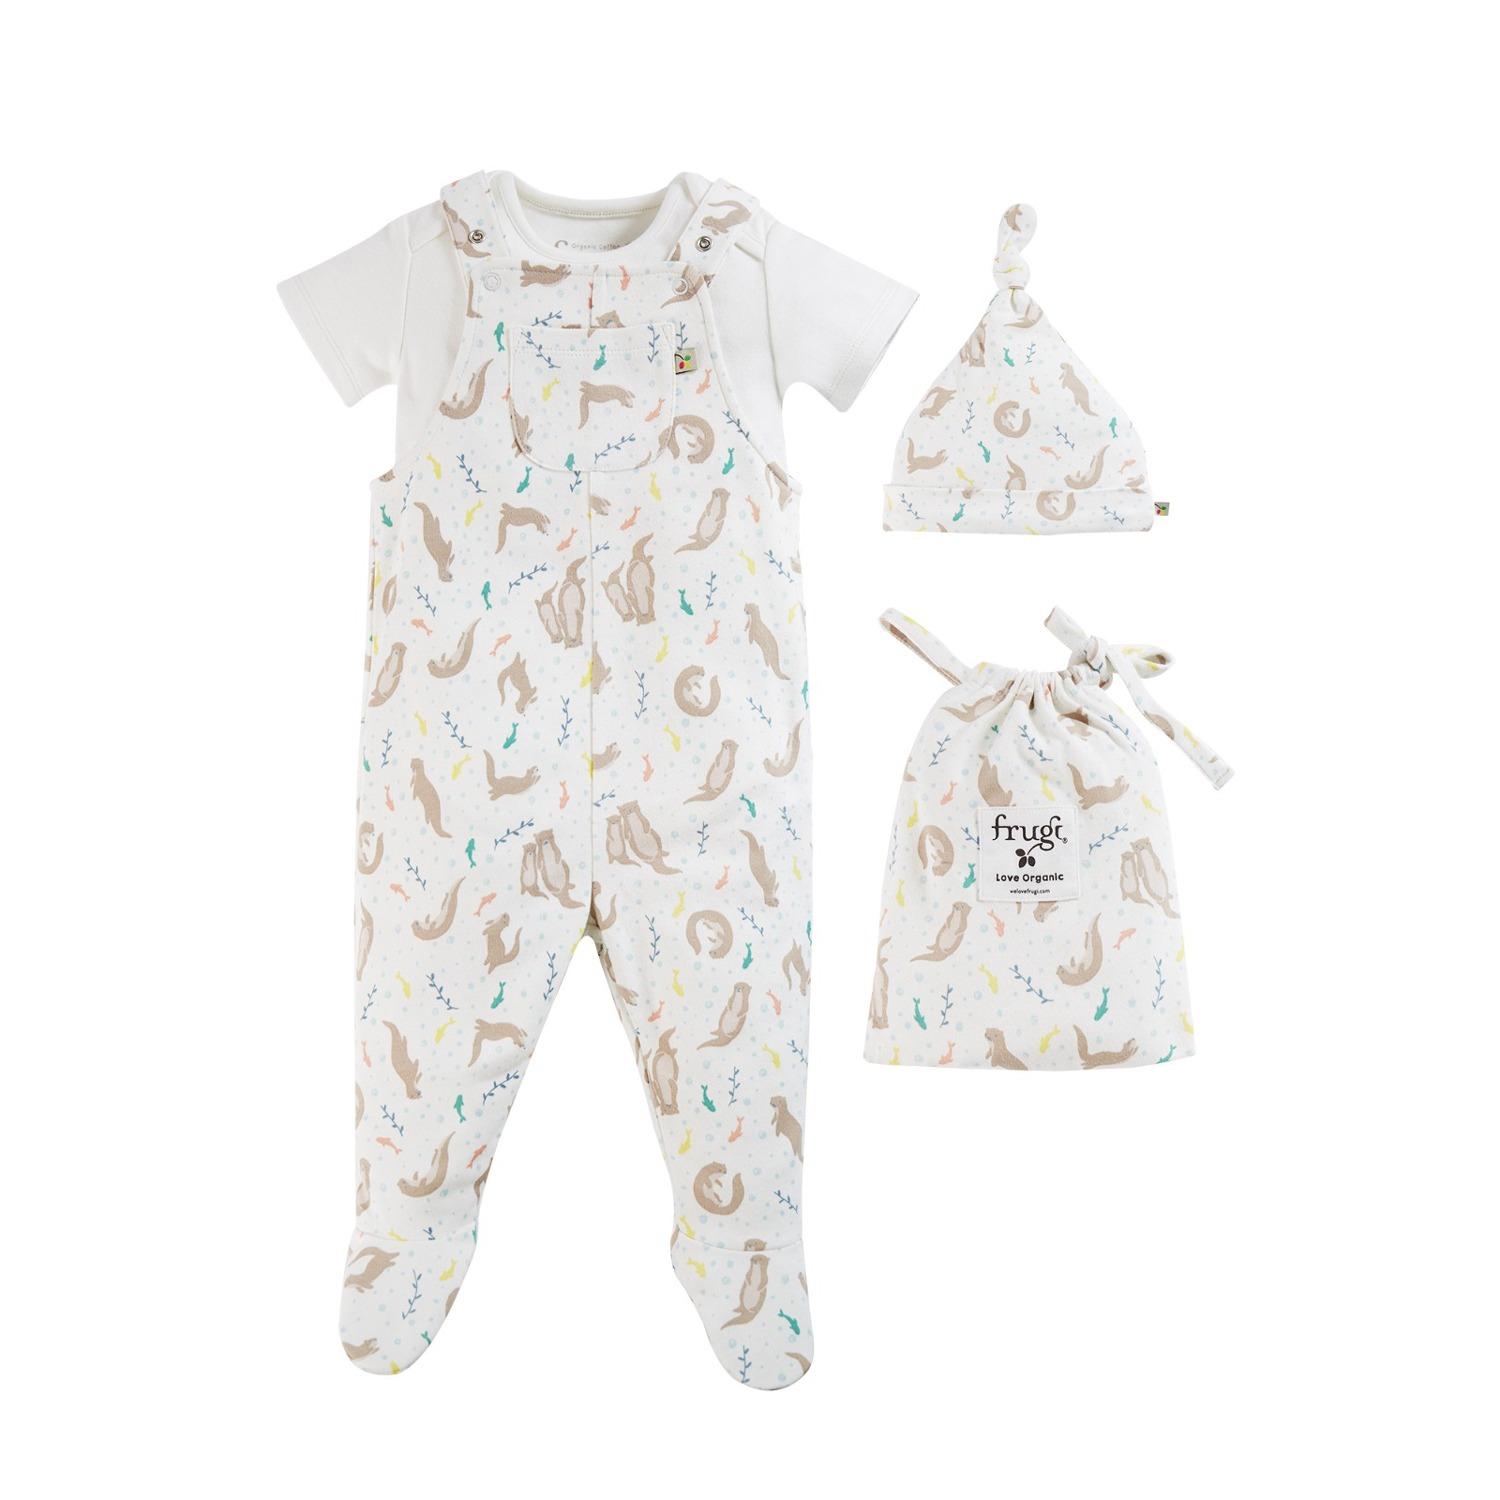 Otterly Dungarees Baby Gift Set by Frugi SS23